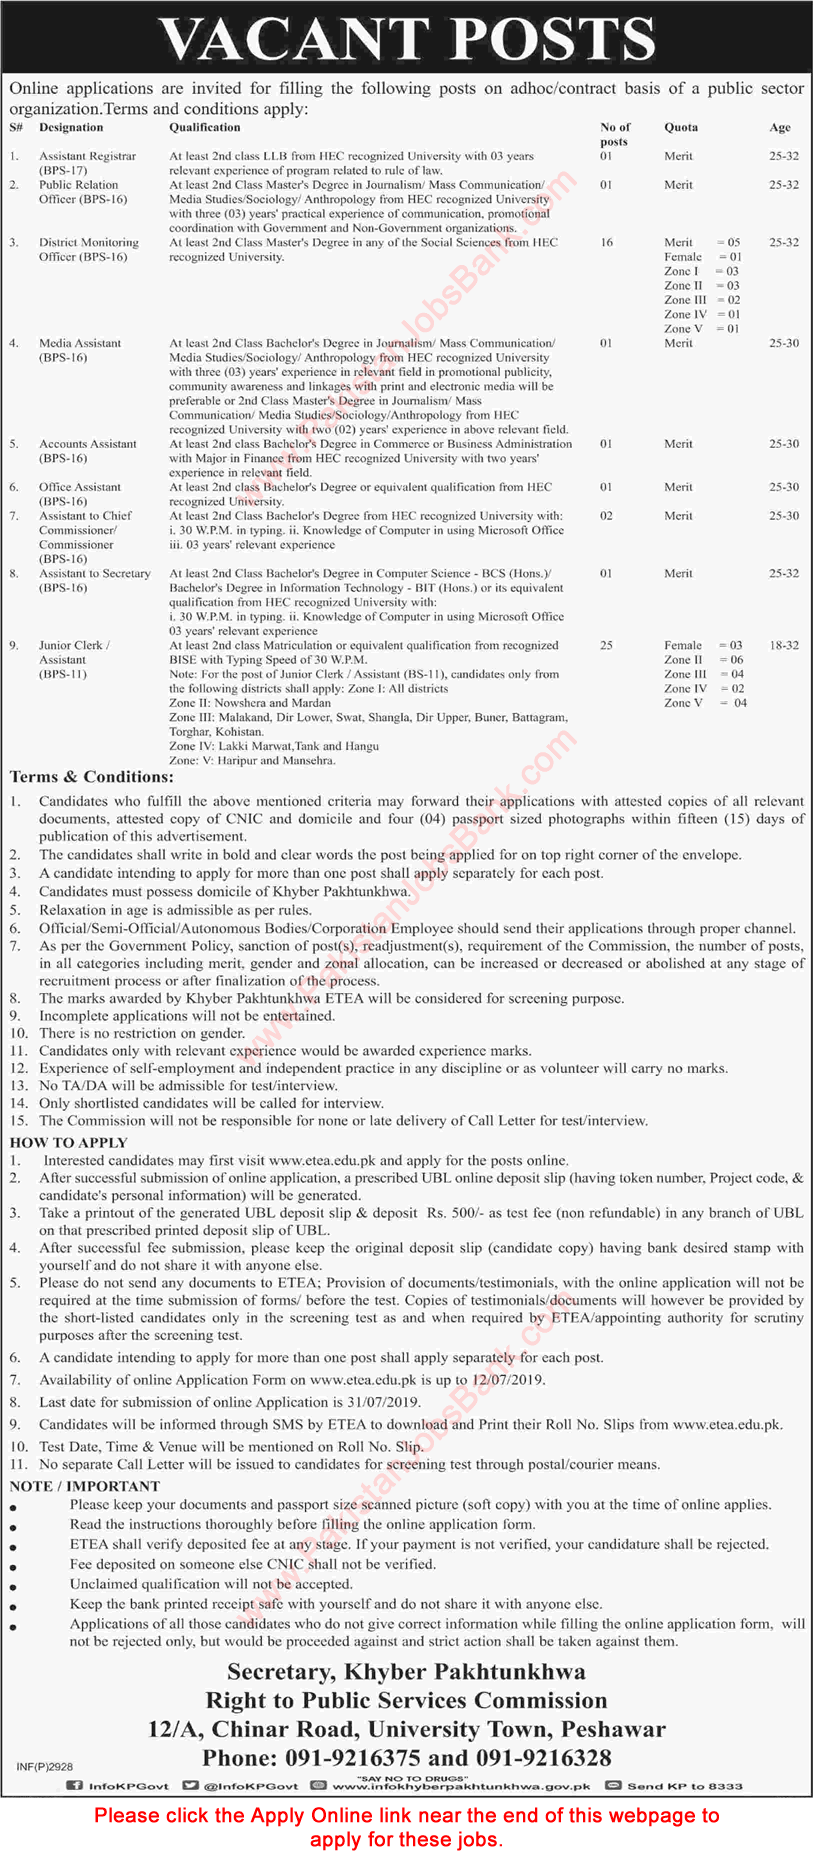 Public Sector Organization Jobs July 2019 KPK ETEA Apply Online Clerks, District Monitoring Officers & Others Latest